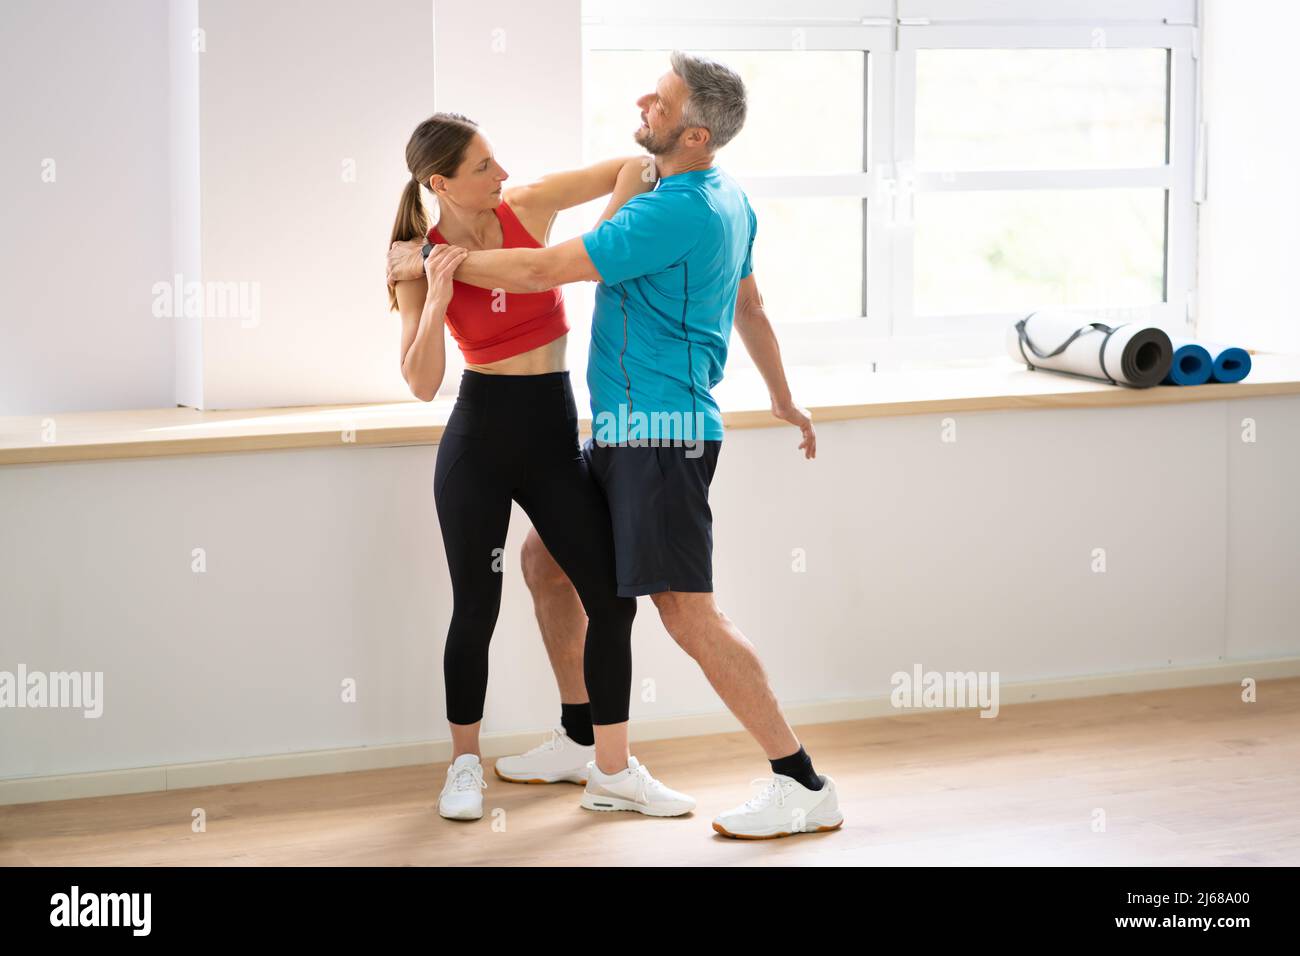 Fight Sparring Fitness Training In Gym. Female Power And Self Defense Stock Photo